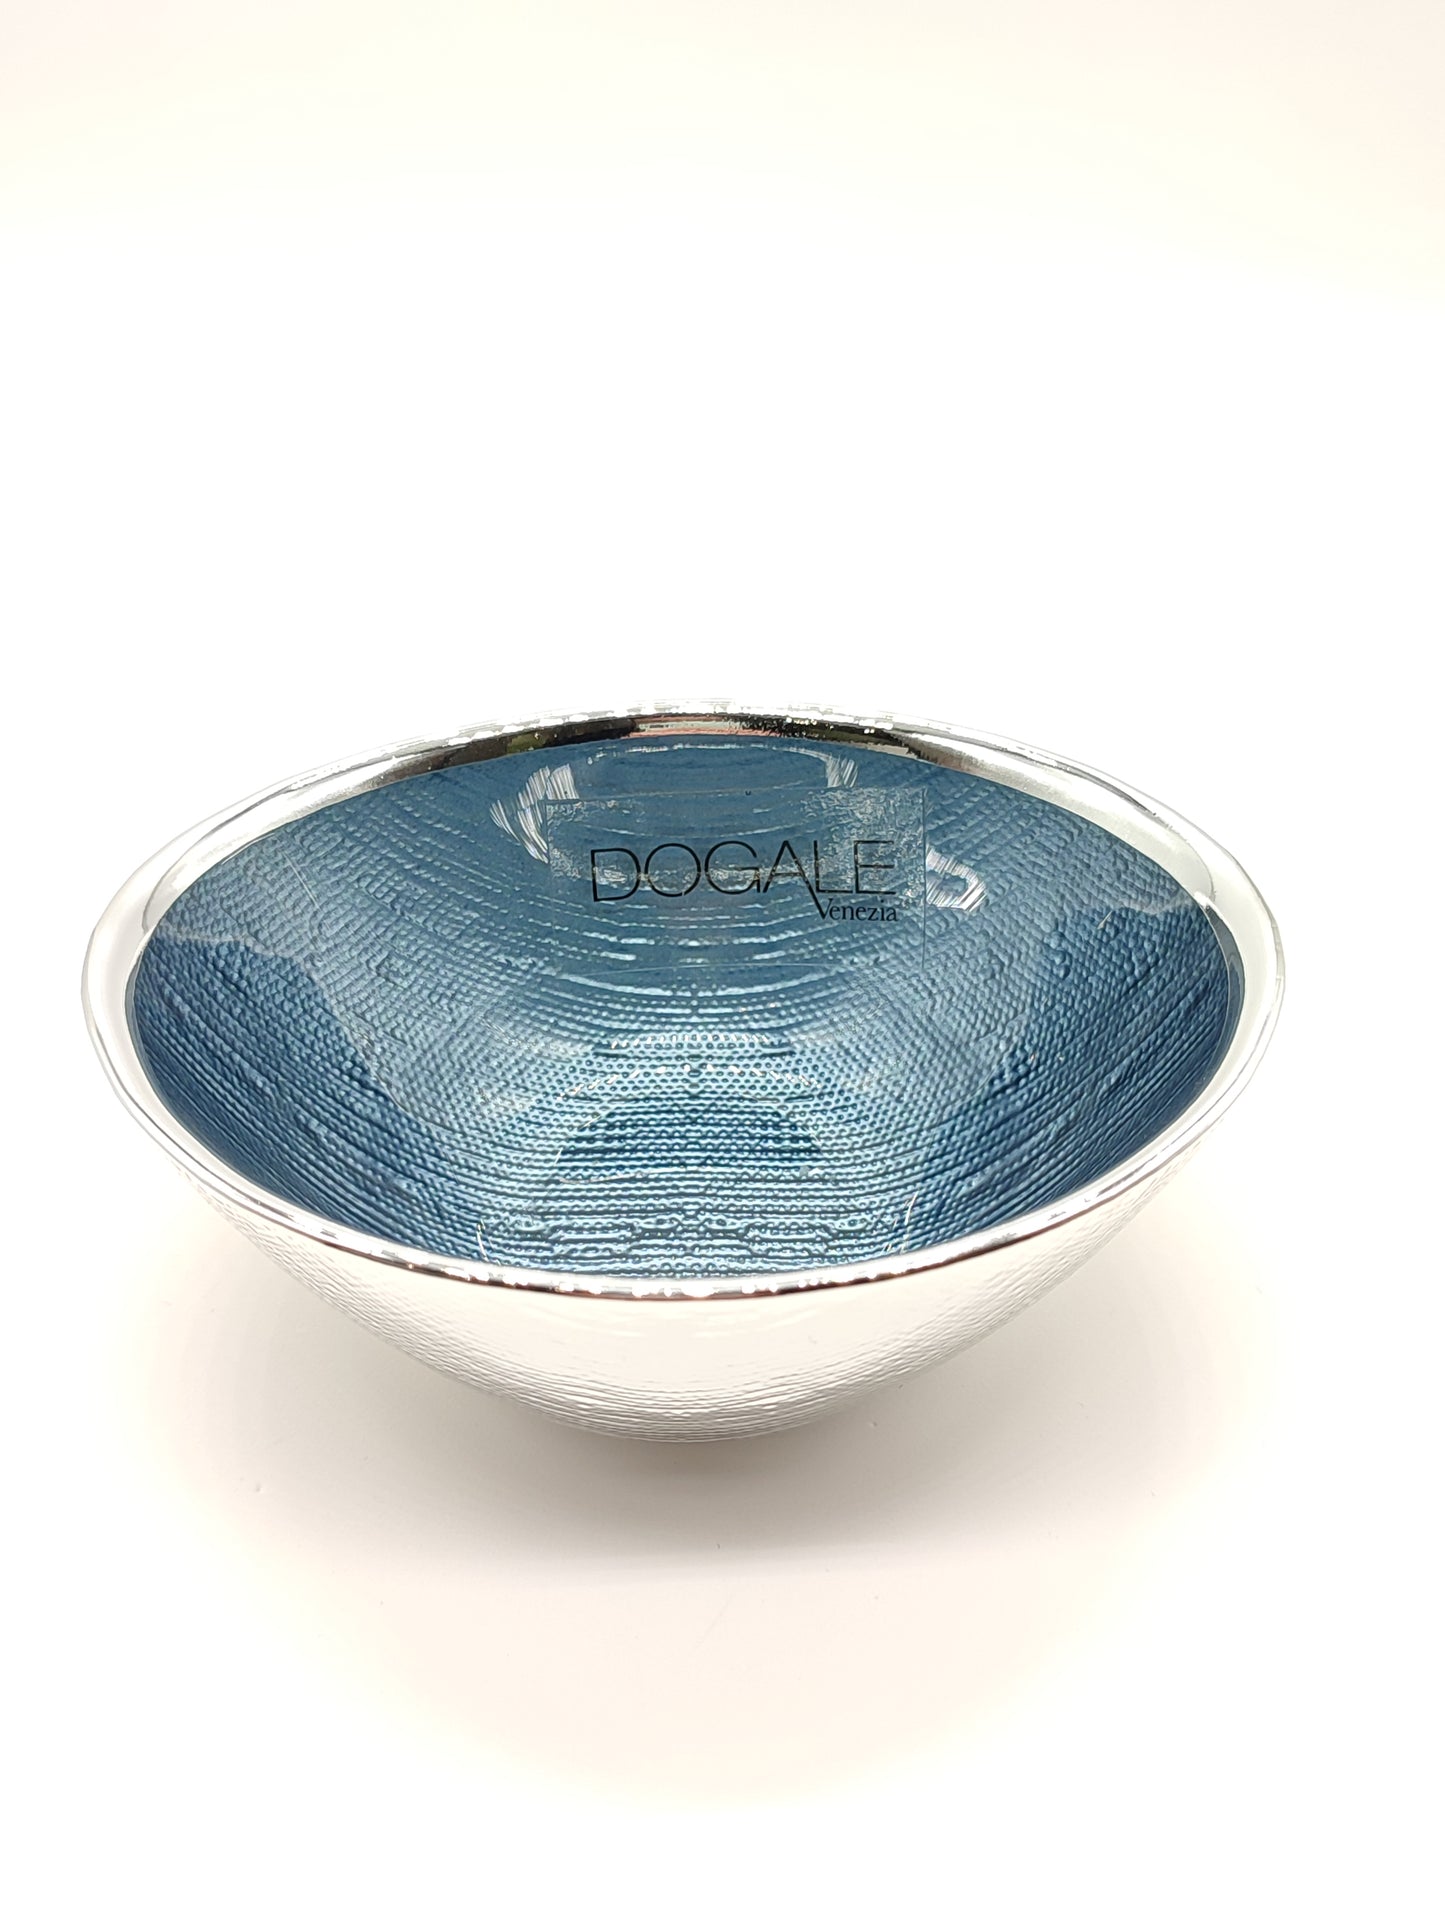 Dogale jeans bowl in silver L11.5cm